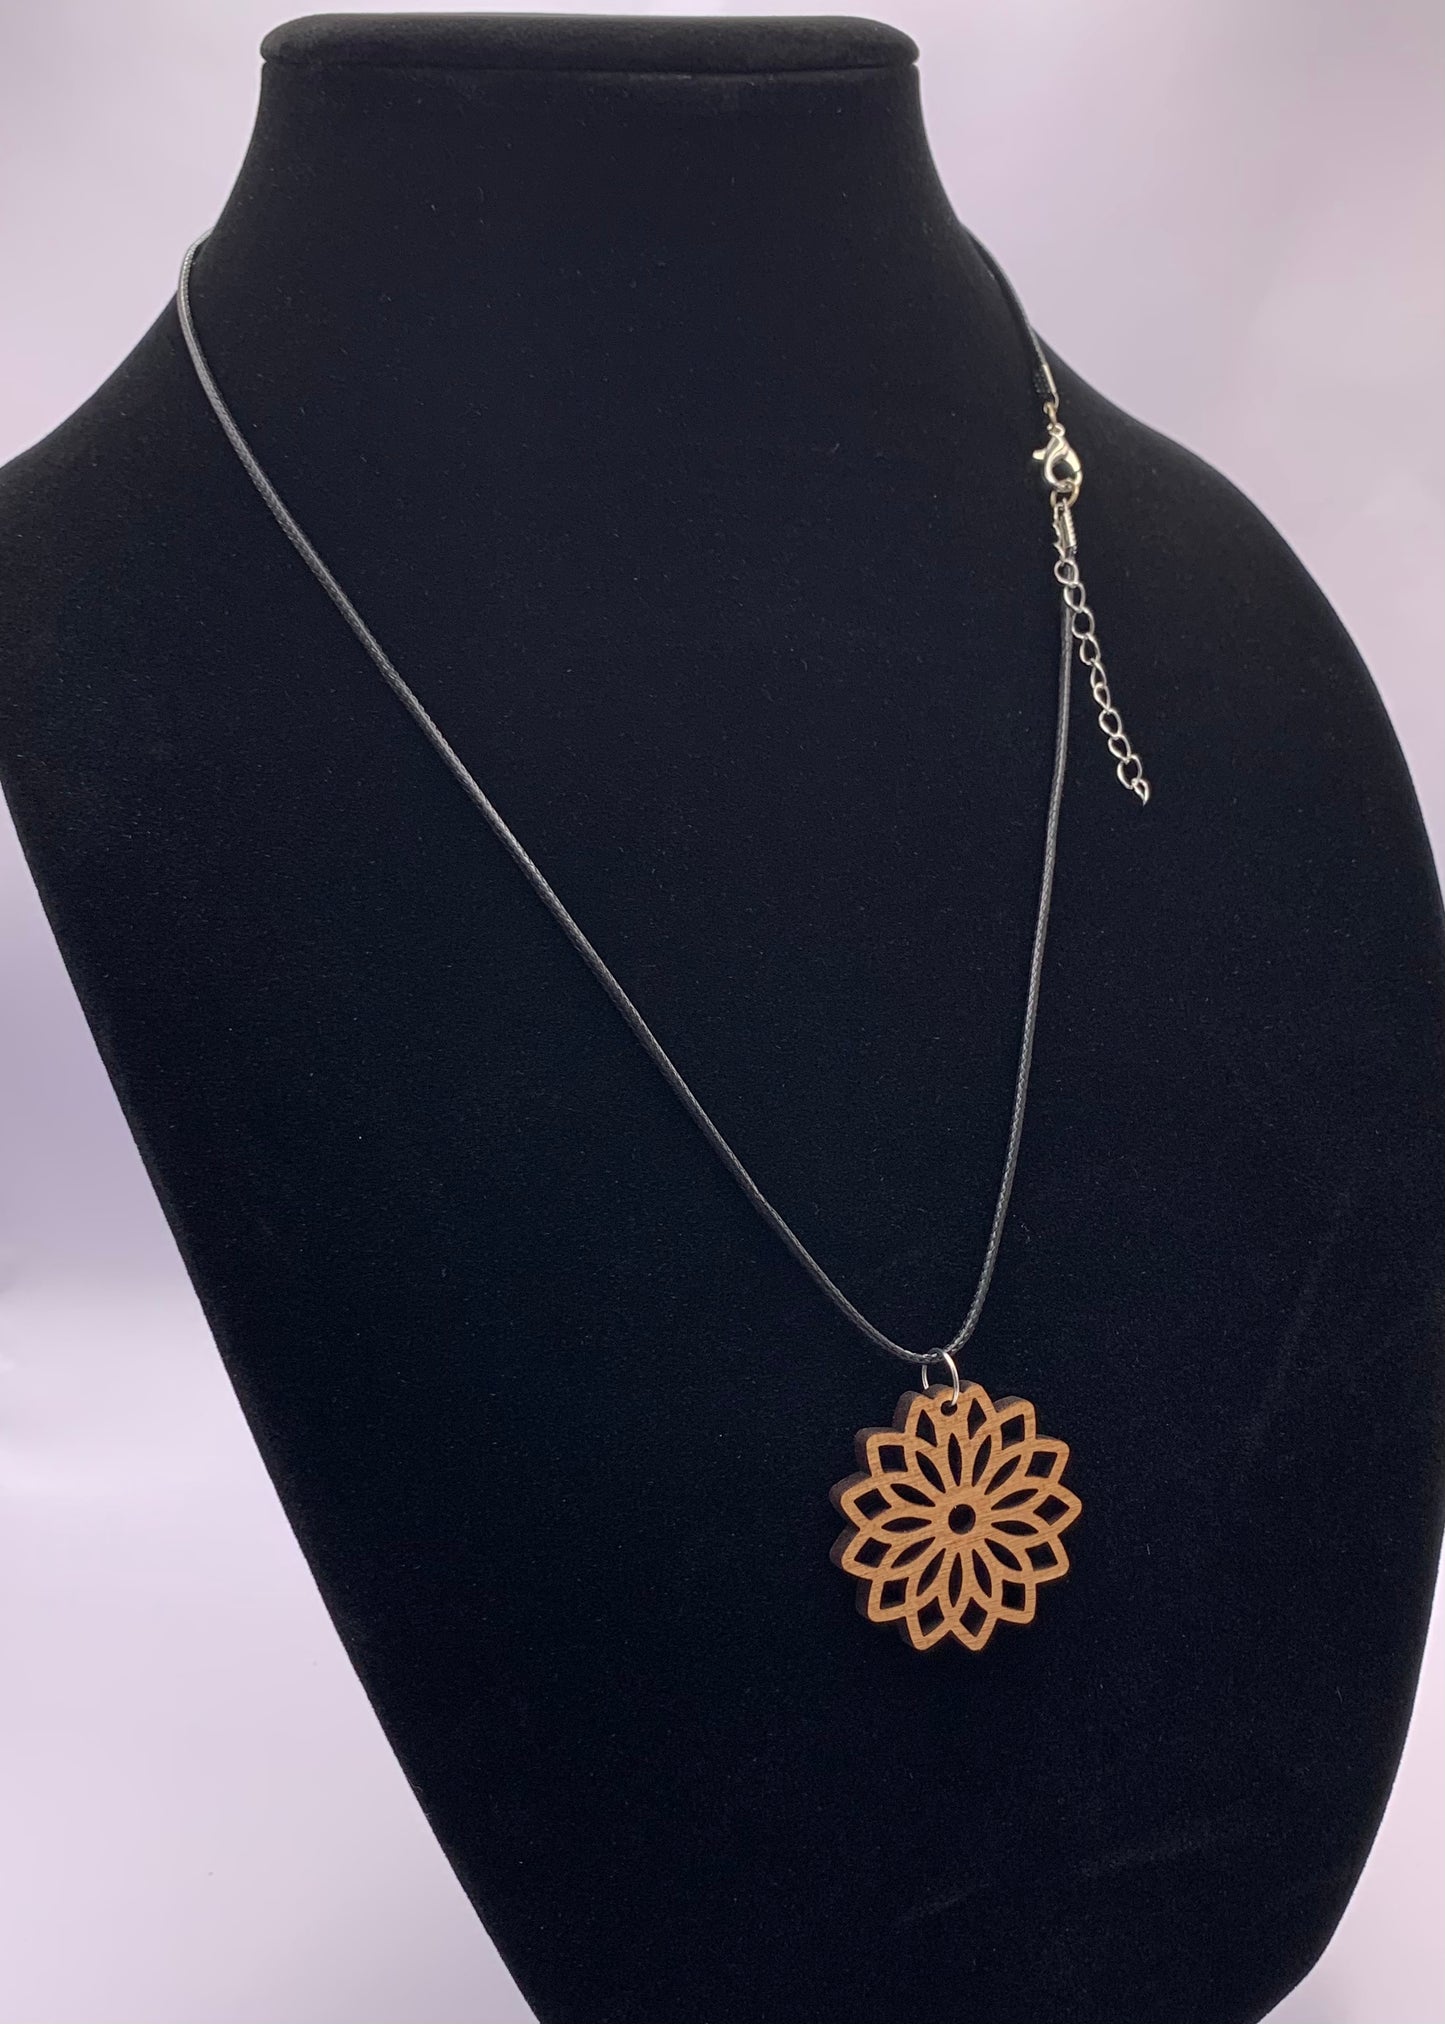 Mandala Necklace - Deep In The Art Creations